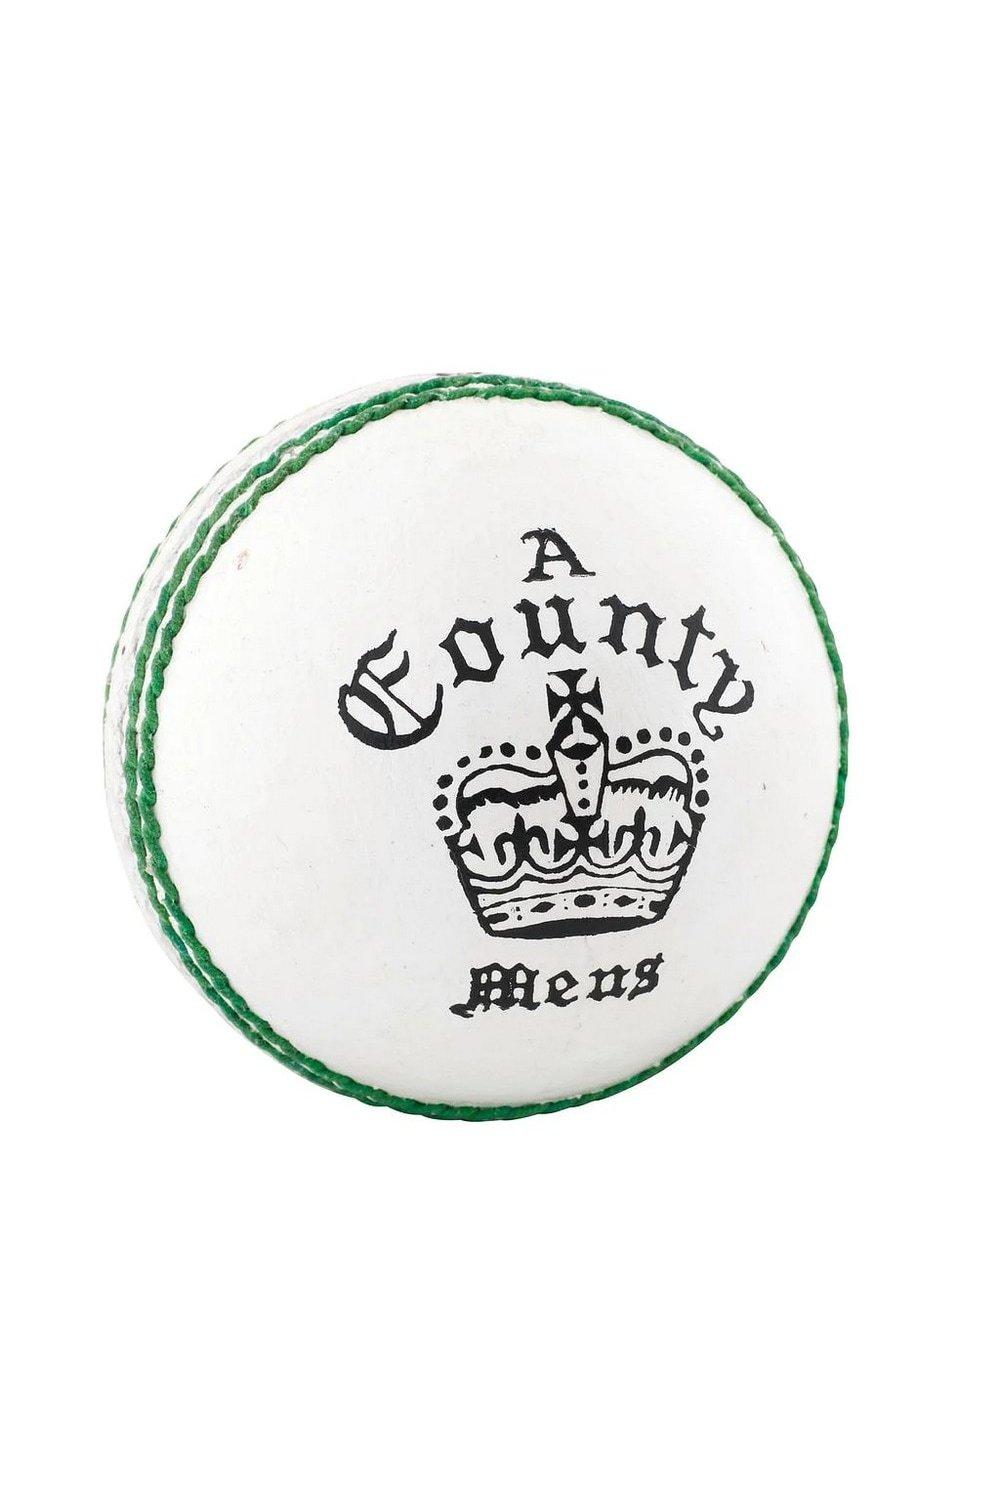 County Crown Leather Cricket Ball